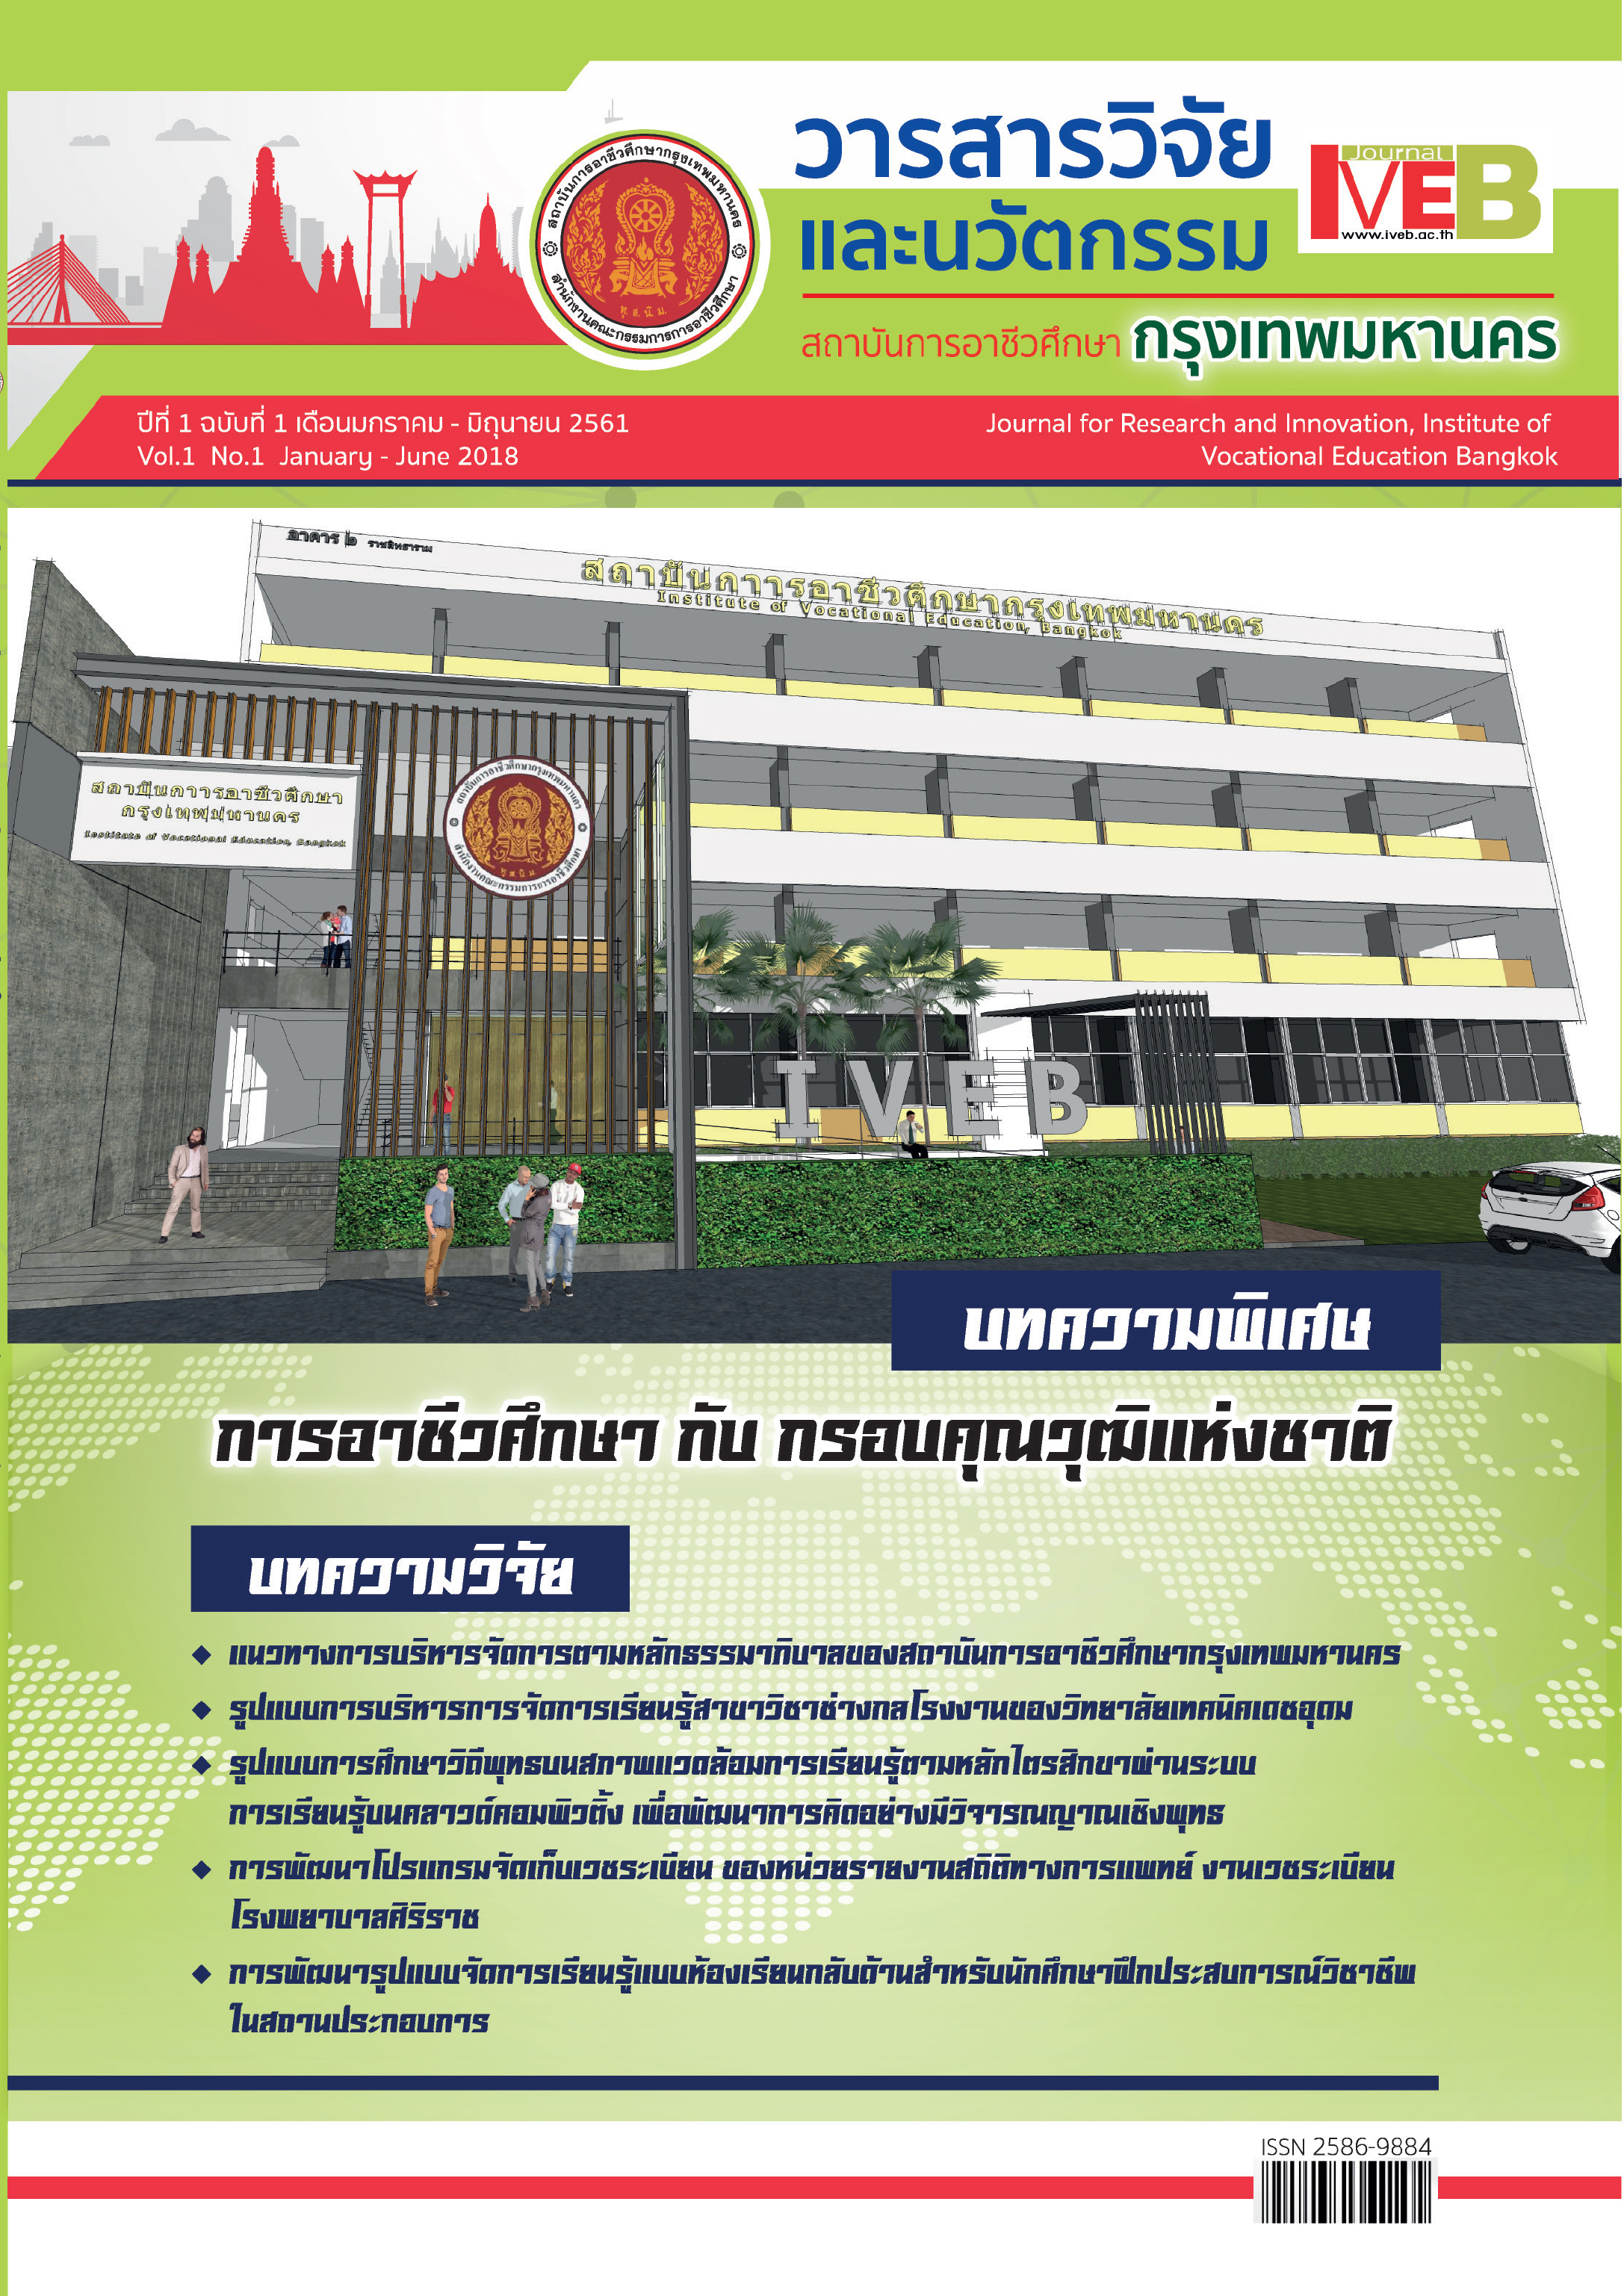 Vol 1 Issue number 1 (2018) : Journal for Research and Innovation, Institute of Vocational Education Bangkok